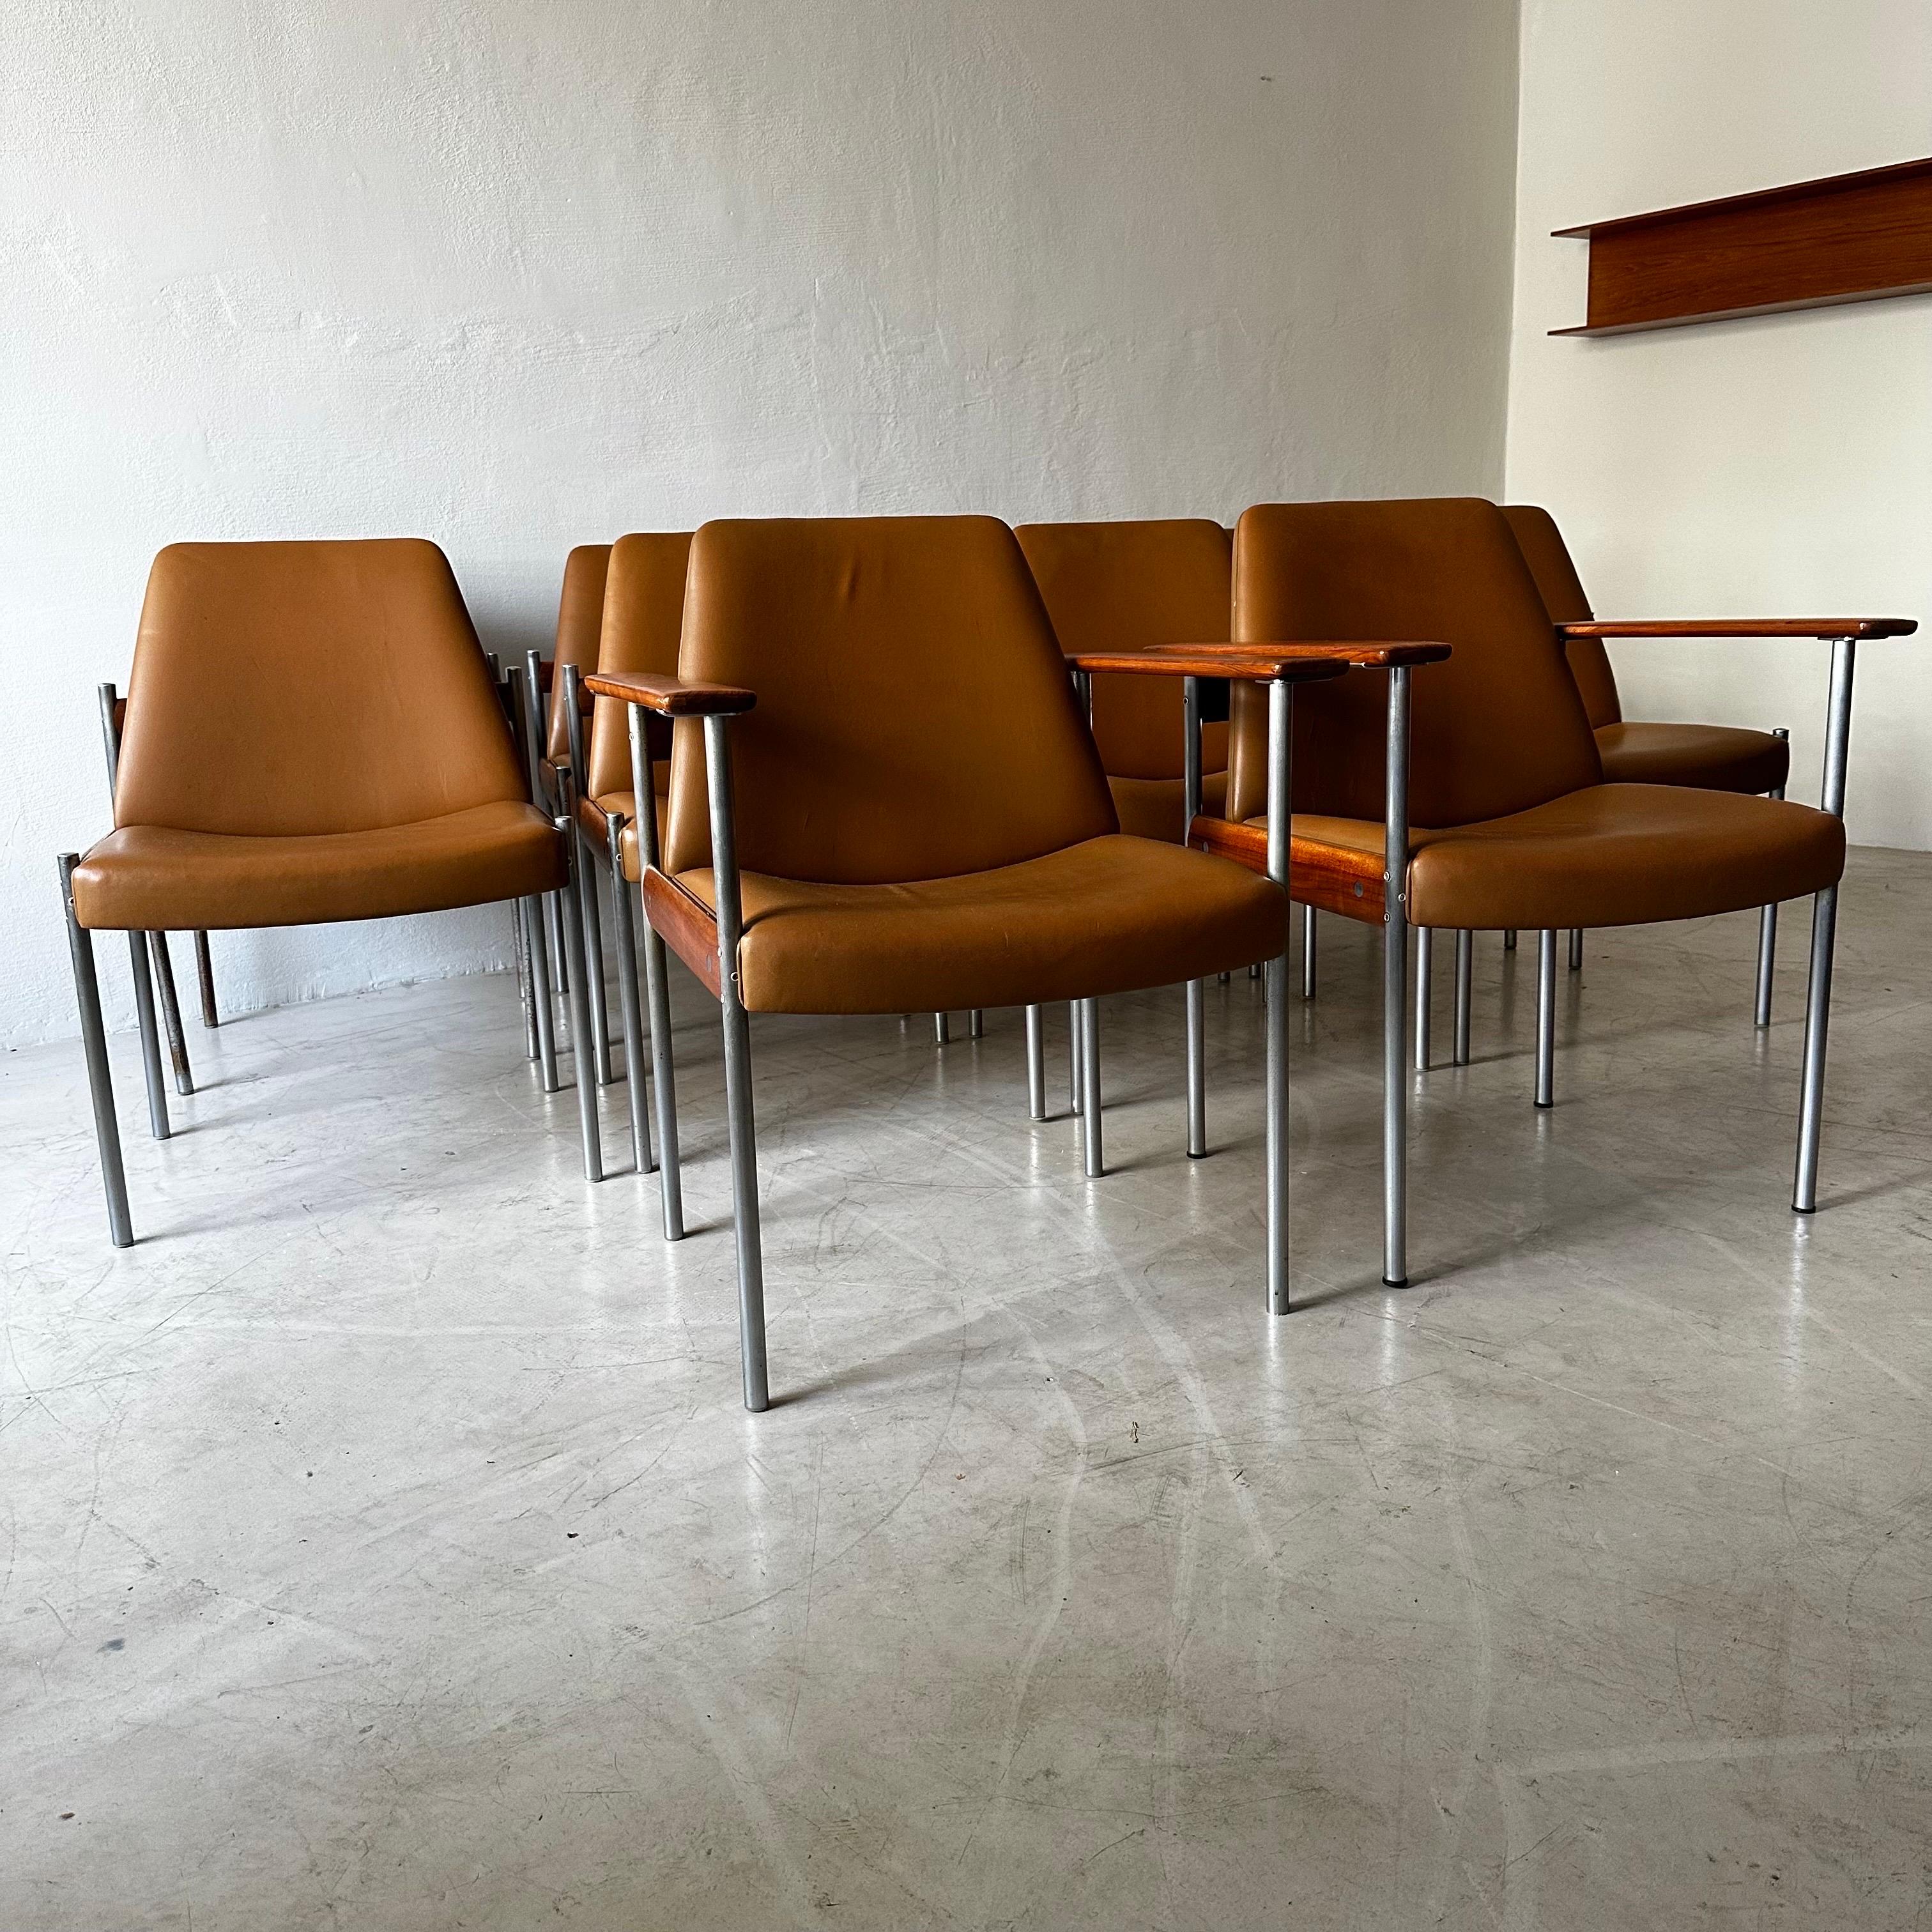 Metal Sven Ivar Dysthe Large Set of 10 Chairs in Cognac Leather and Walnut For Sale